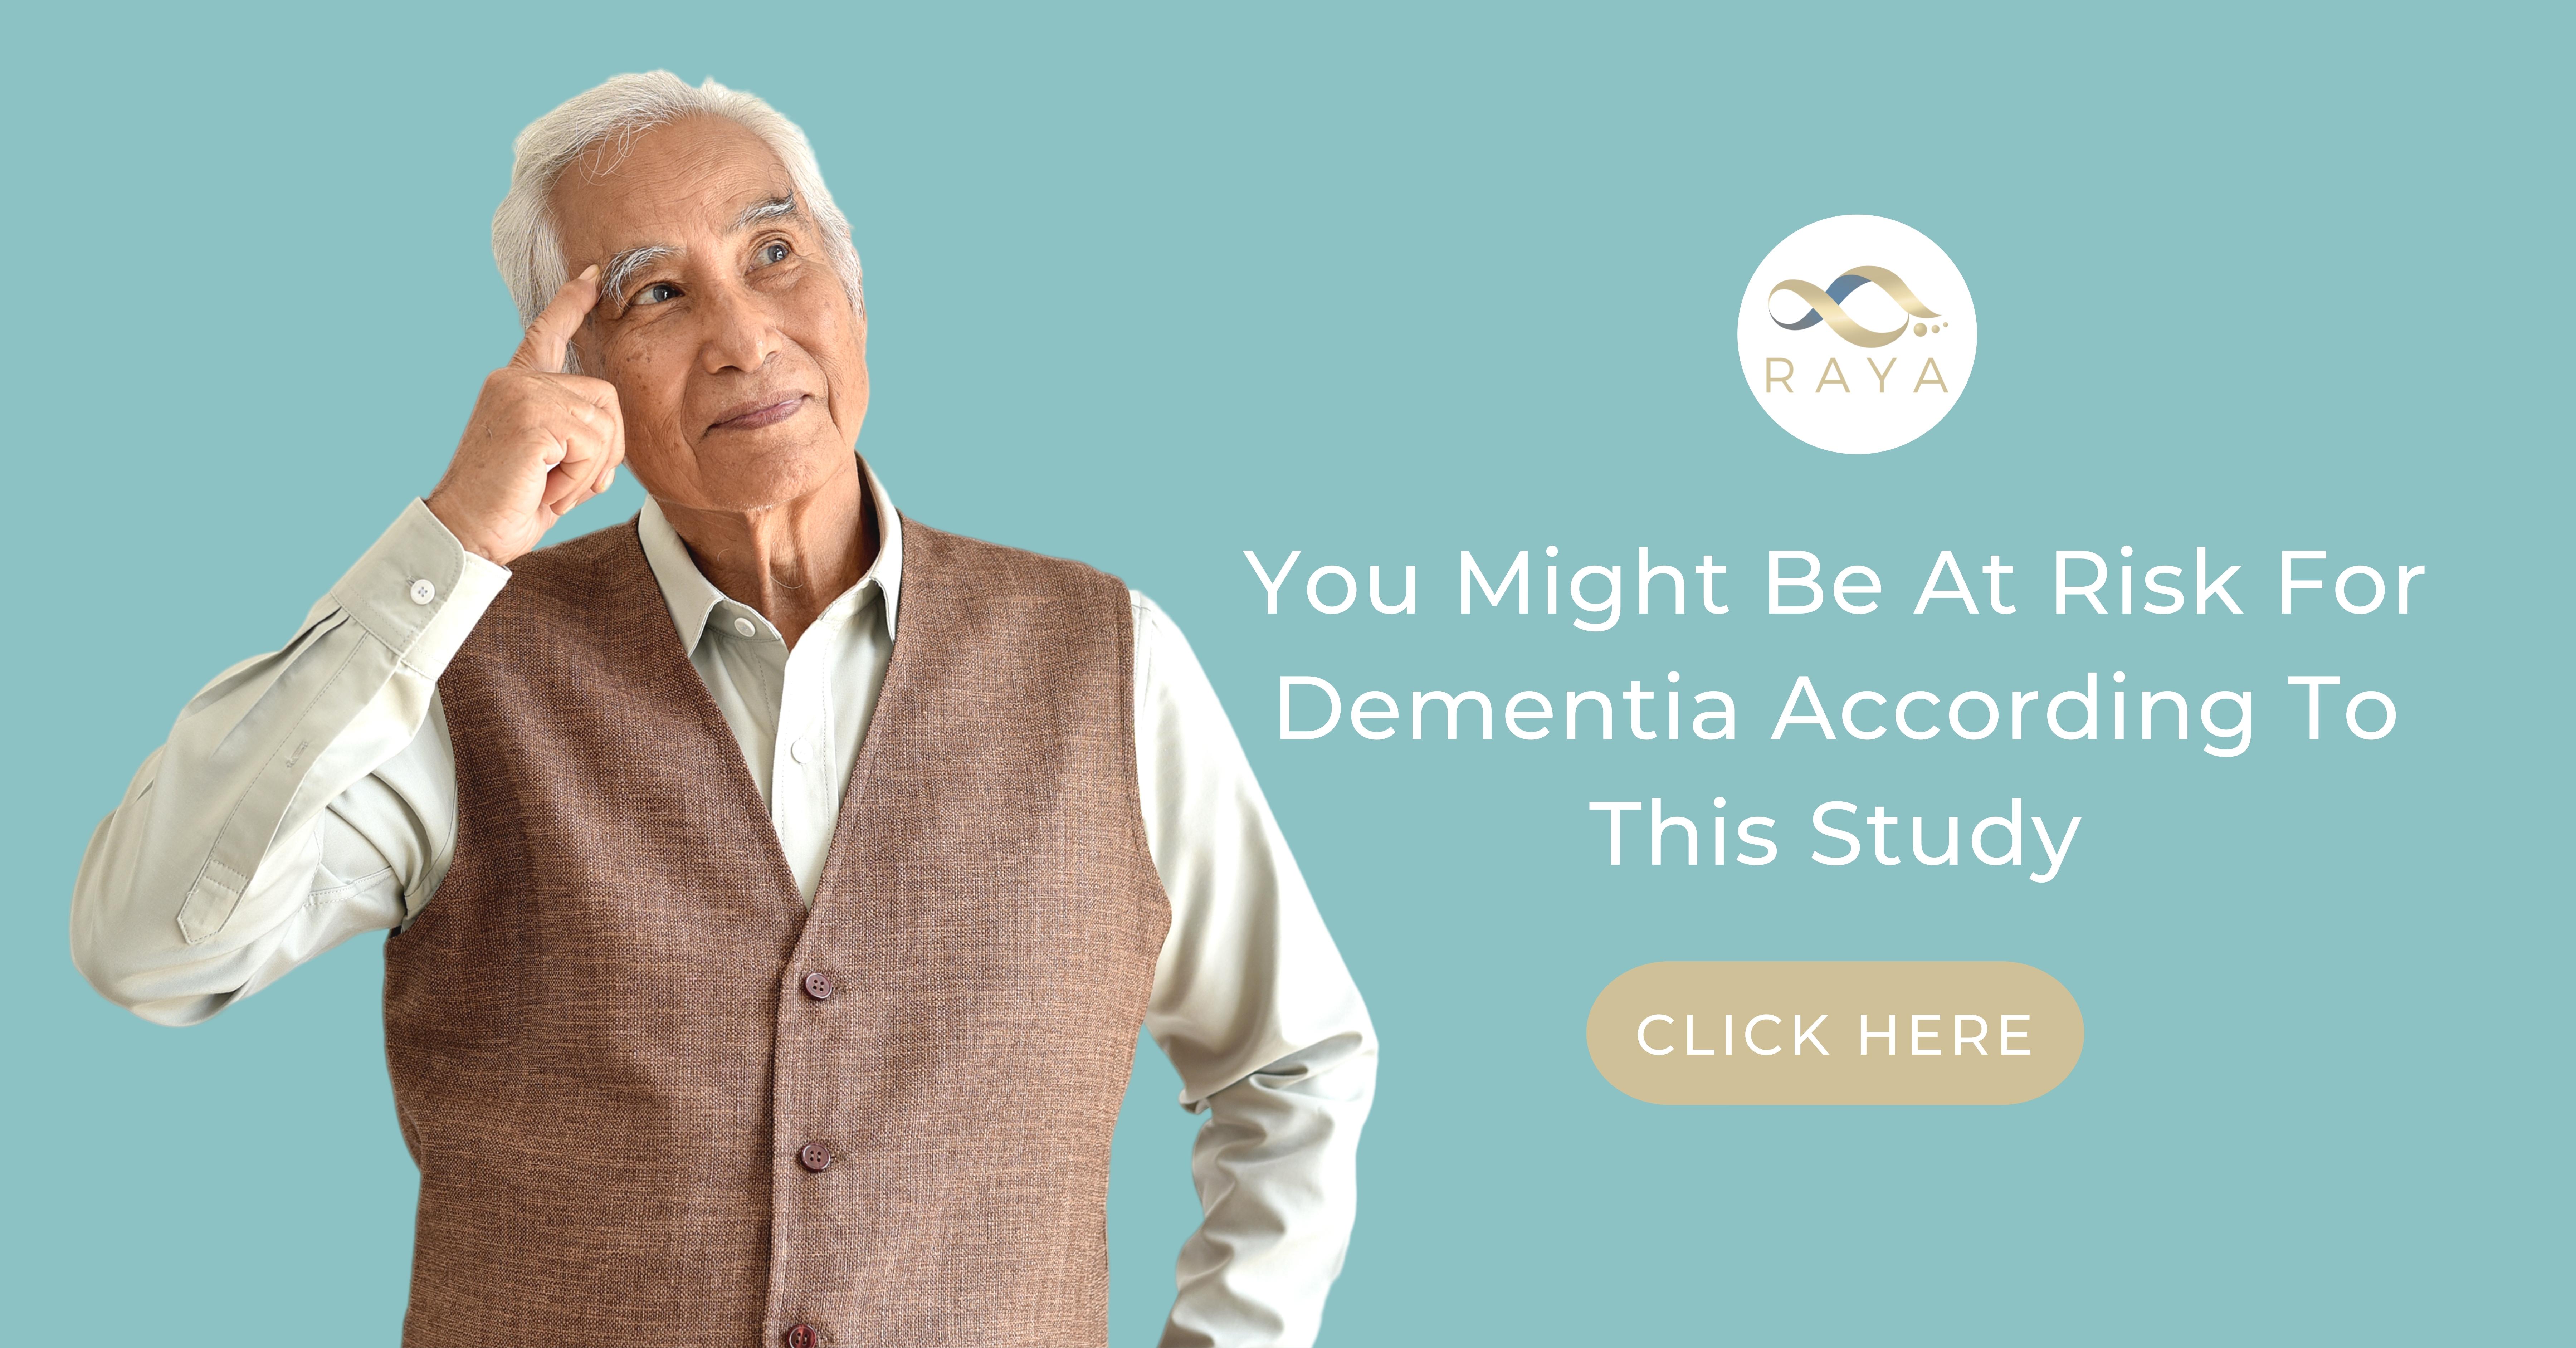 You Might Be At Risk For Dementia According To This Study